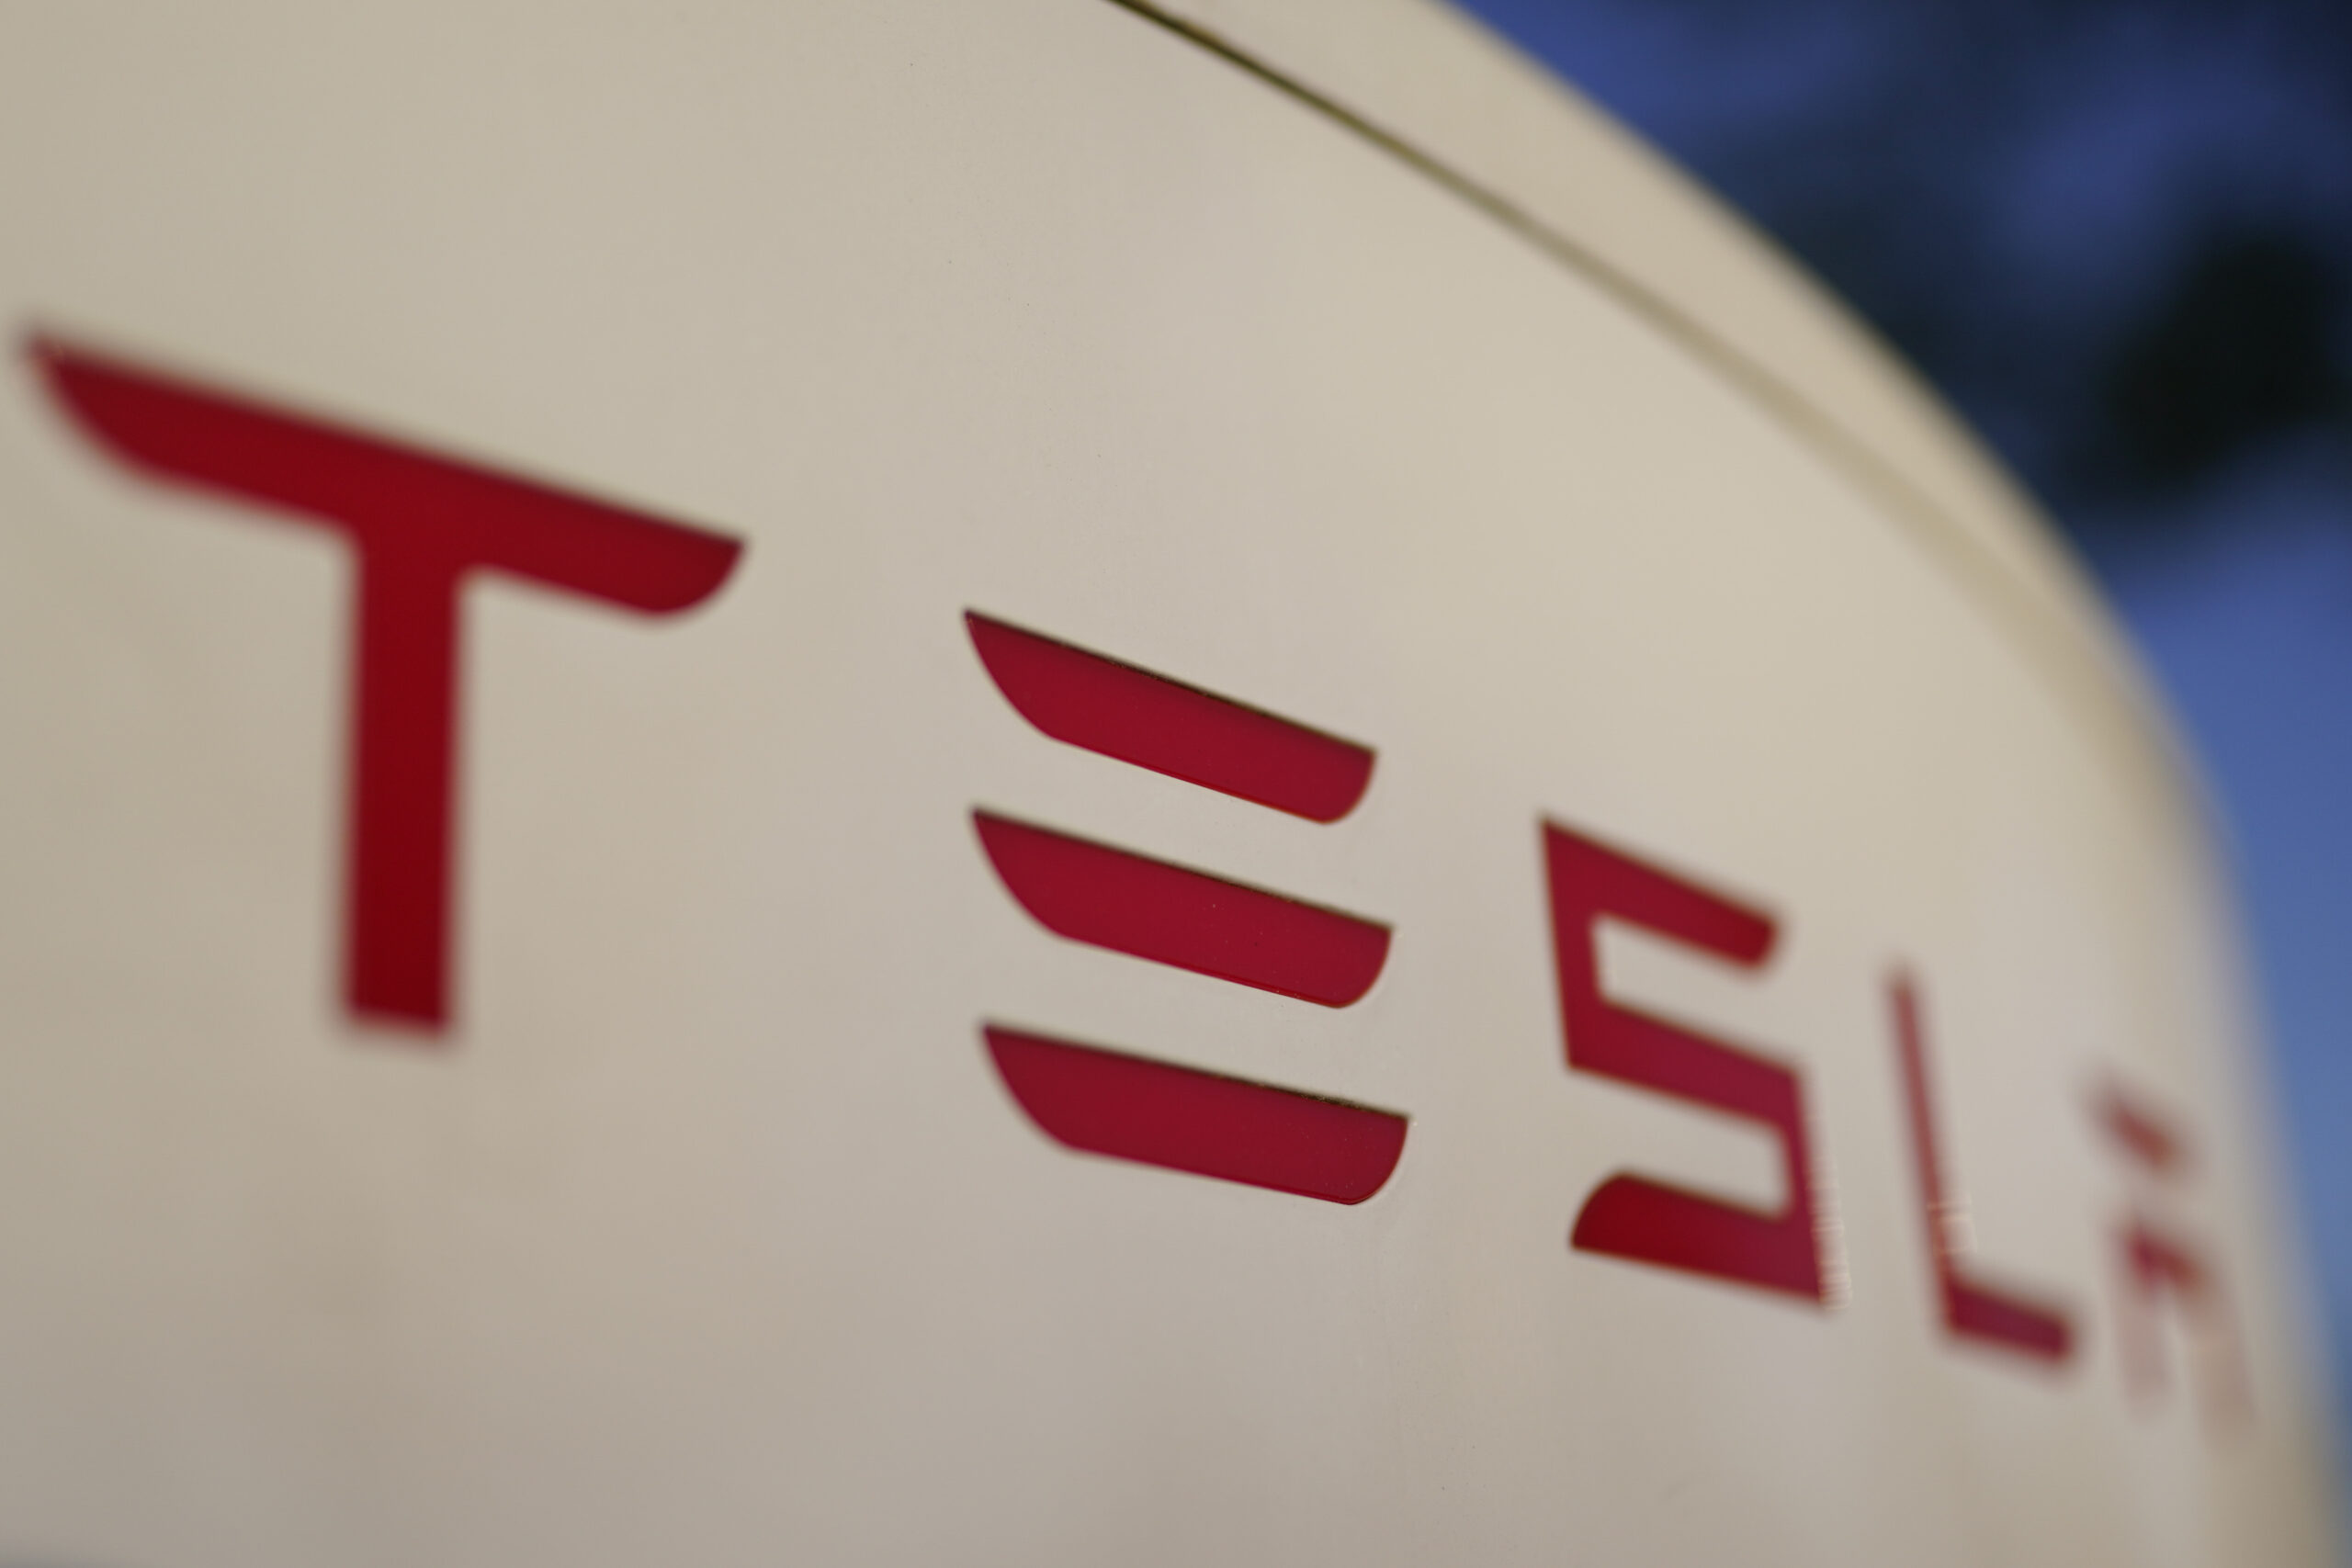 FILE - The logo for the Tesla Supercharger station is seen in Buford, Ga, April 22, 2021,. Tesla is recalling nearly 579,000 vehicles in the U.S. because sounds played over an external speaker can obscure audible warnings for pedestrians. The recall is the fourth made public in the last two weeks as U.S. safety regulators increase scrutiny of the nation’s largest electric vehicle maker. (AP Photo/Chris Carlson, File)